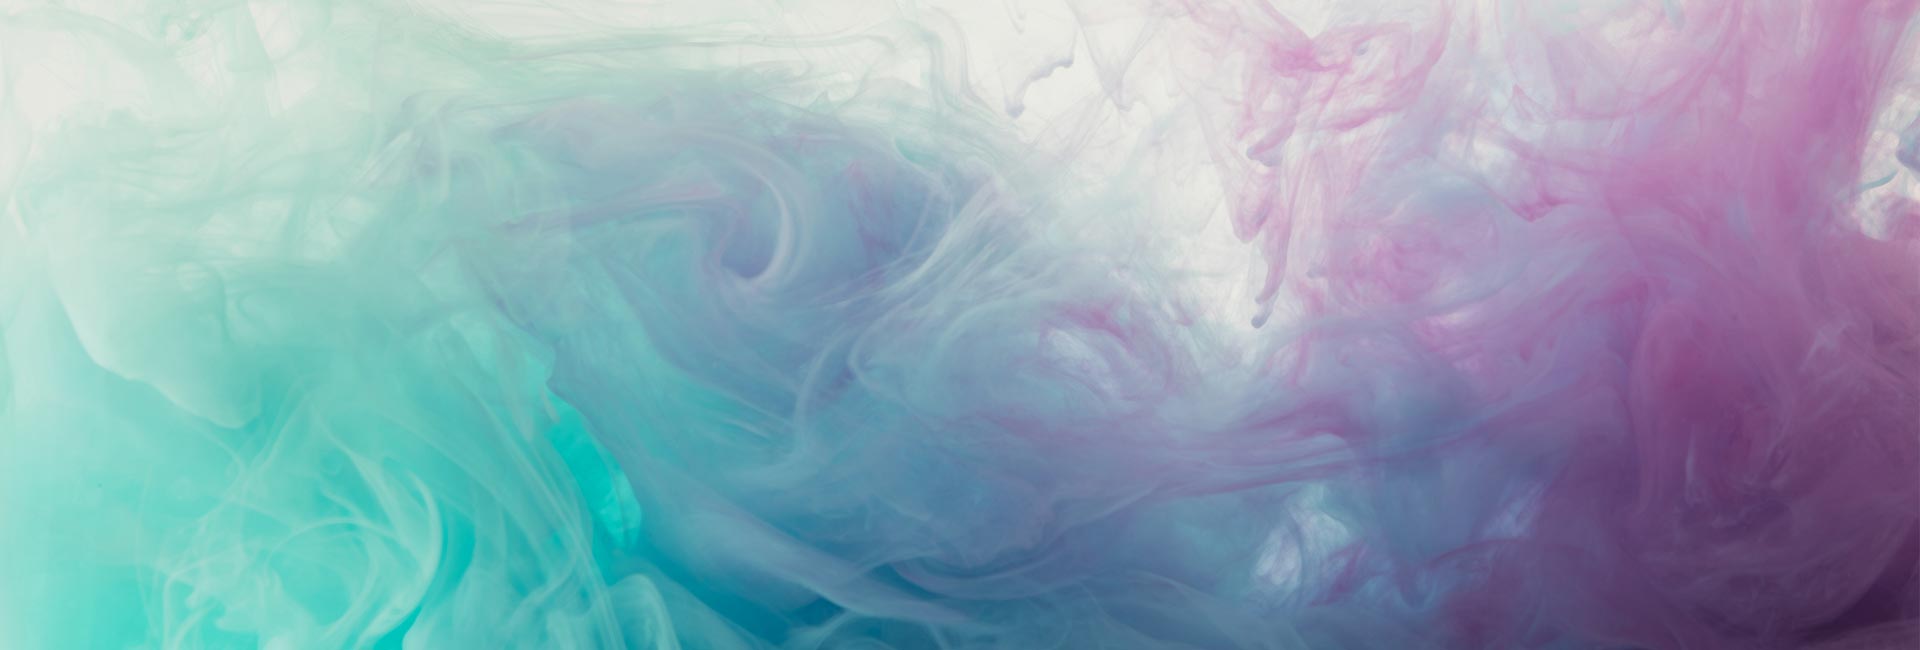 Abstract background with flowing blue and purple paint